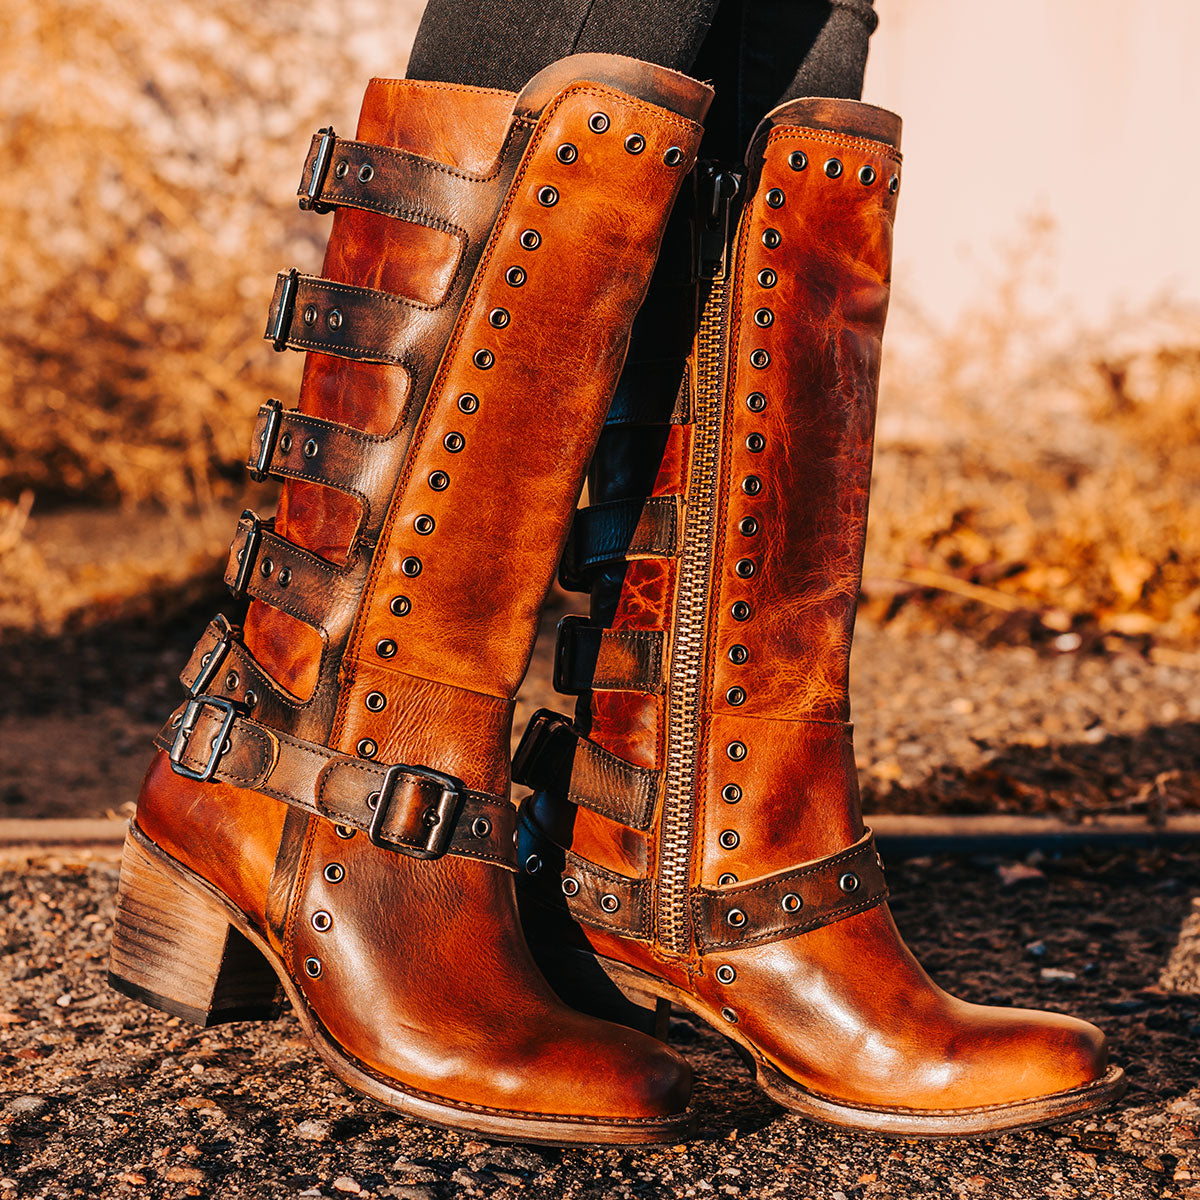 FREEBIRD women's Derby cognac leather boot with shaft buckle straps, eyelet studs and square toe construction 